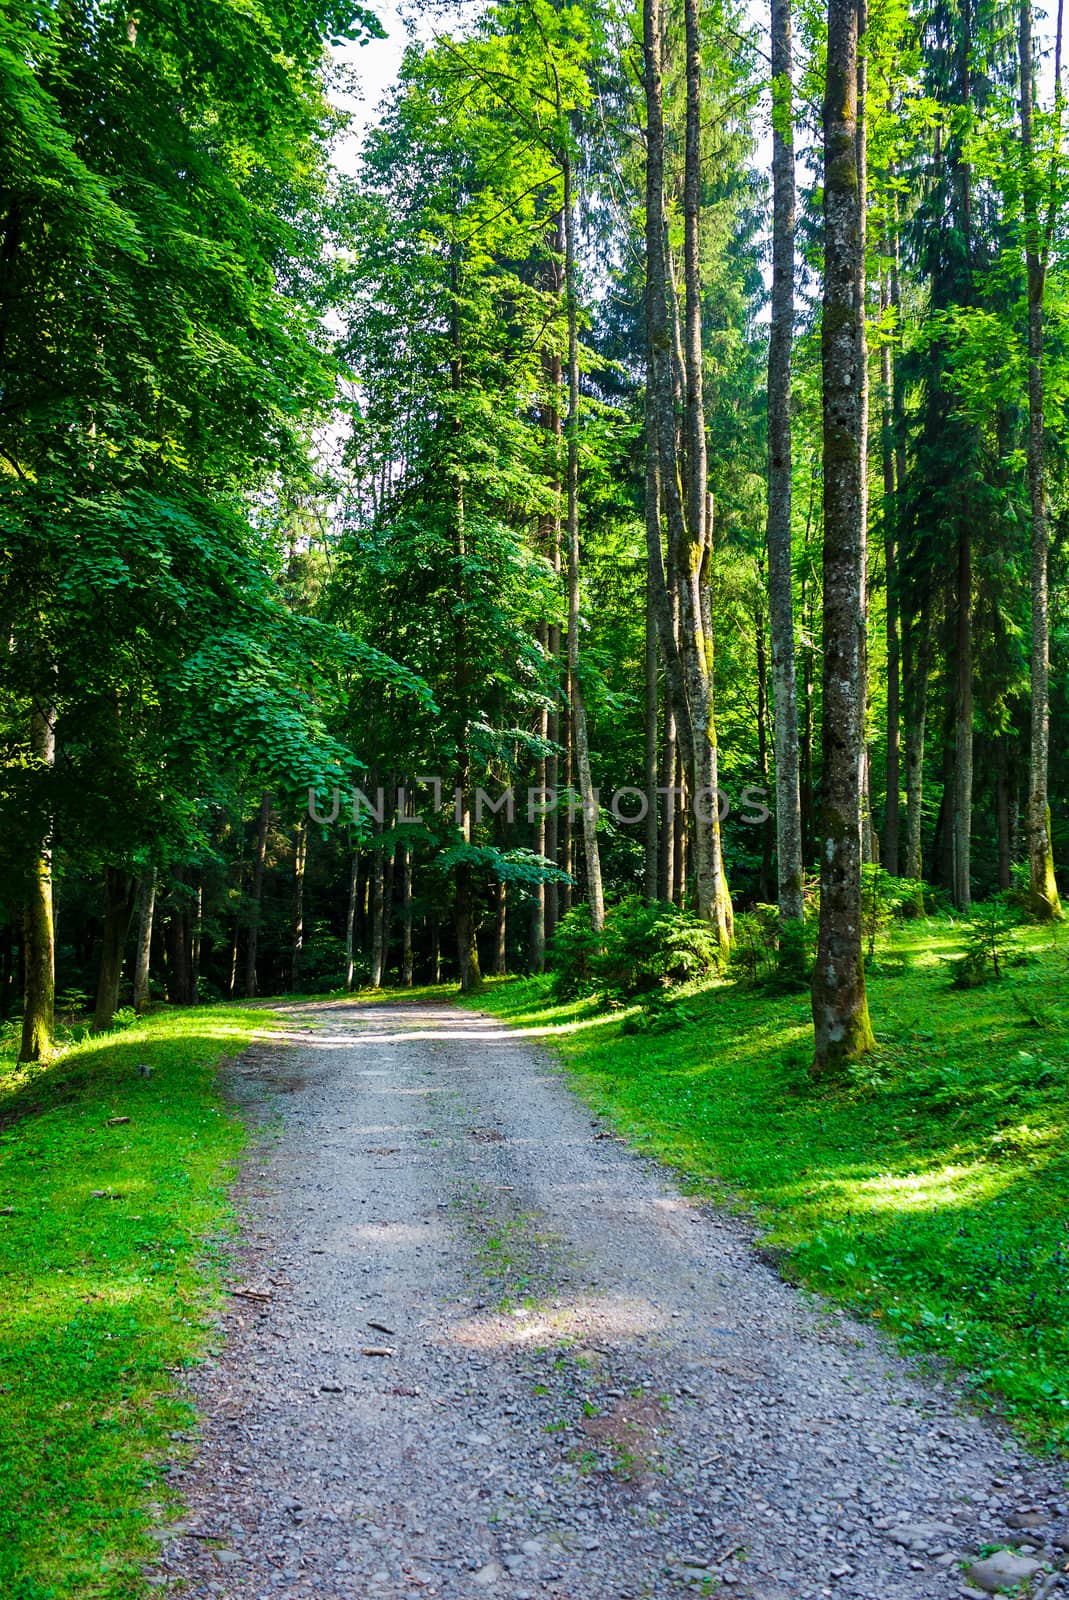 country road through forest in evening light. lovely nature scenery with tall trees and green foliage